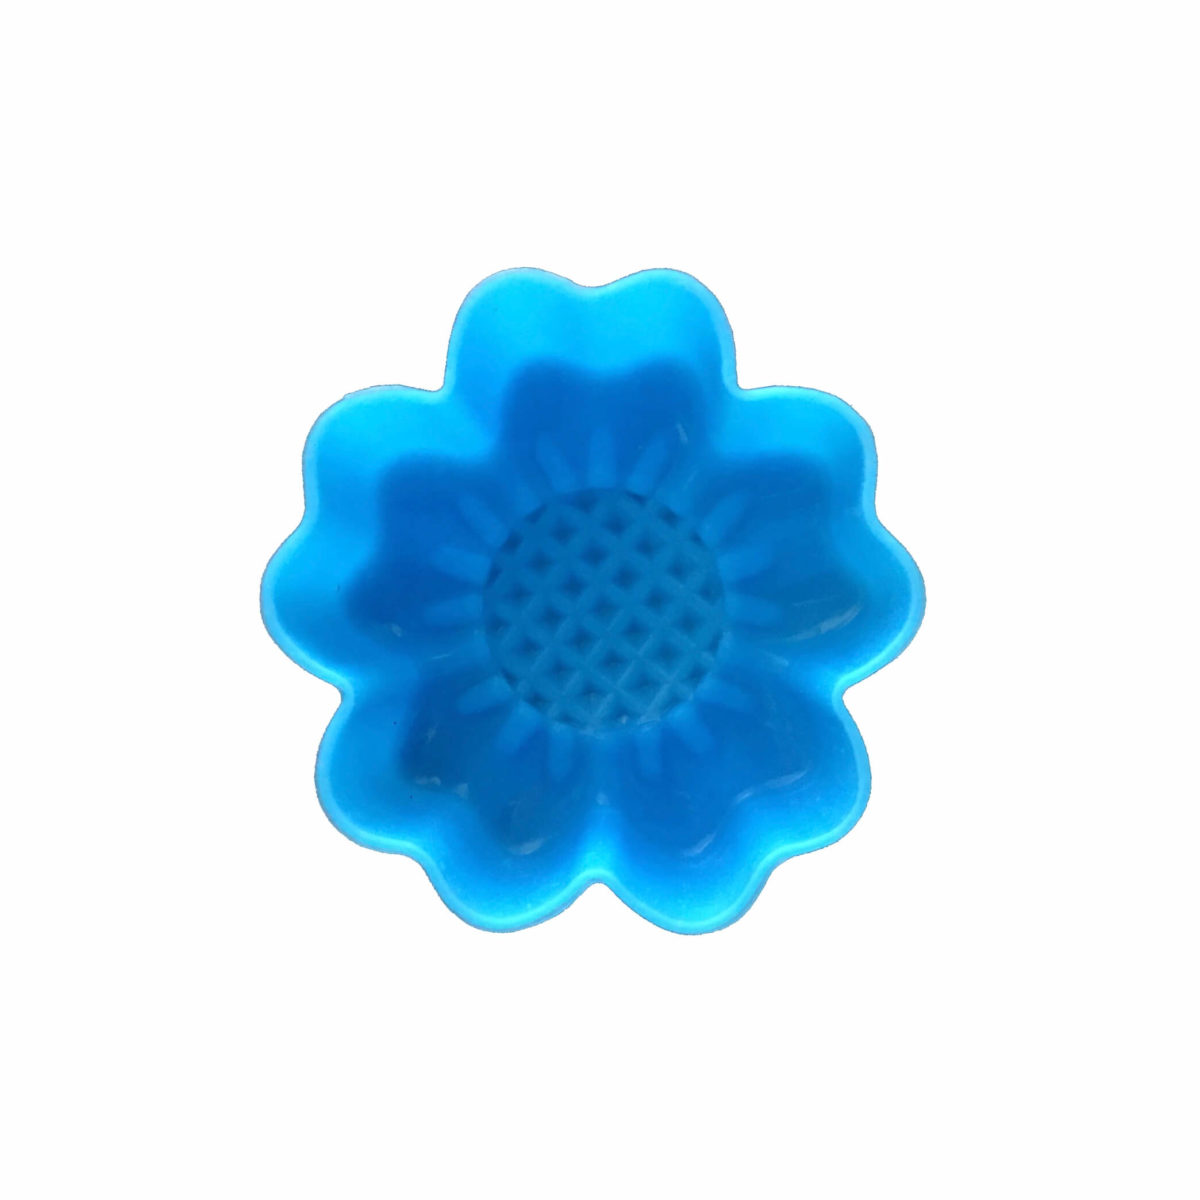 back of 5cm blue sunflower single cavity silicone mould